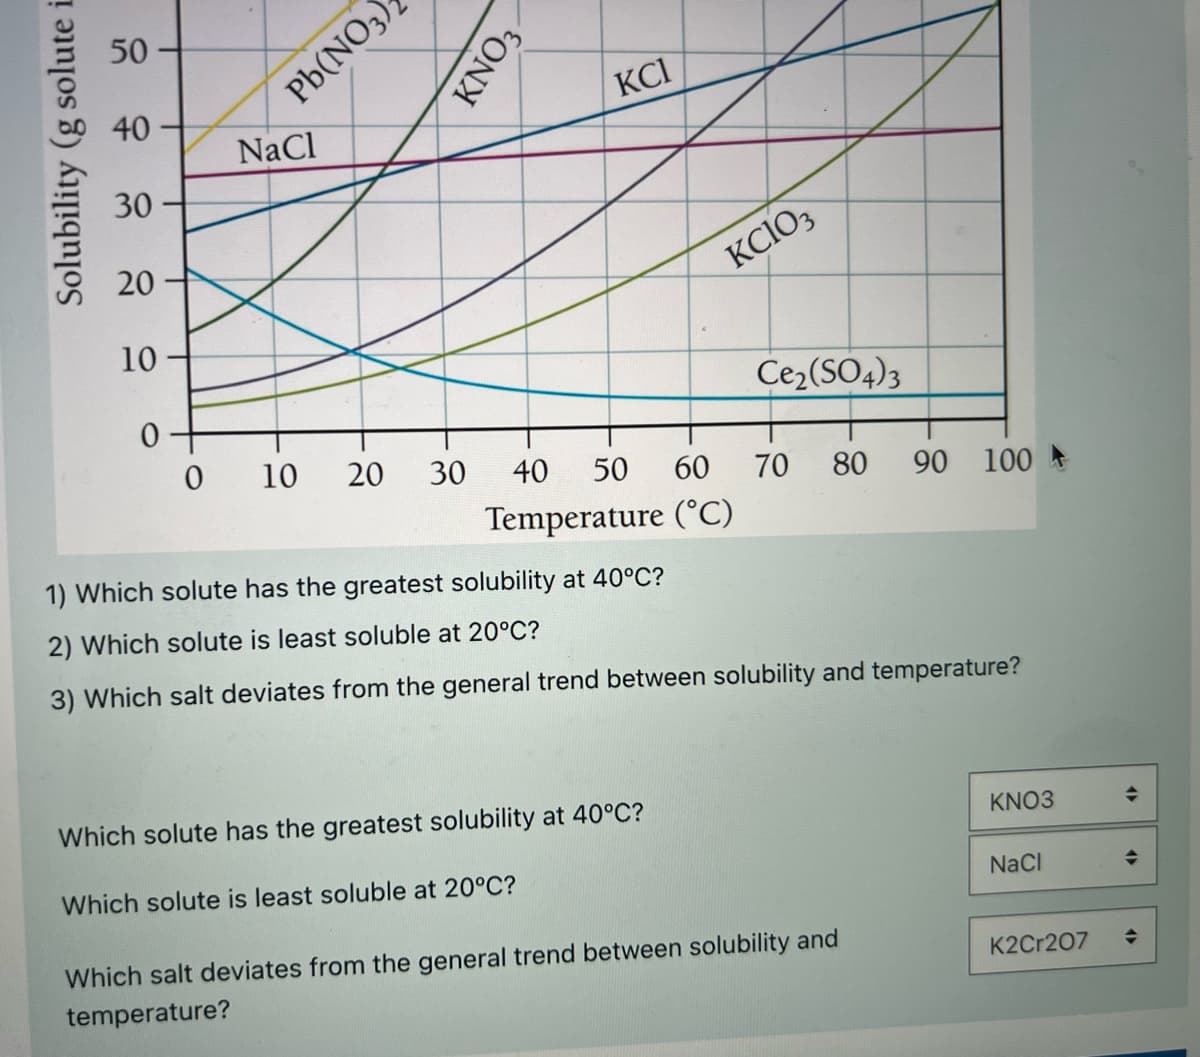 50
Pb(NO3);
KCI
40
NaCl
30
20
KCIO3
10
Ce2(SO4)3
10
20
30
40
50
60
70
80
90
100 A
Temperature (°C)
1) Which solute has the greatest solubility at 40°C?
2) Which solute is least soluble at 20°C?
3) Which salt deviates from the general trend between solubility and temperature?
Which solute has the greatest solubility at 40°C?
KNO3
Which solute is least soluble at 20°C?
NaCl
Which salt deviates from the general trend between solubility and
temperature?
K2Cr207
Solubility (g solute i
KNO3 -
